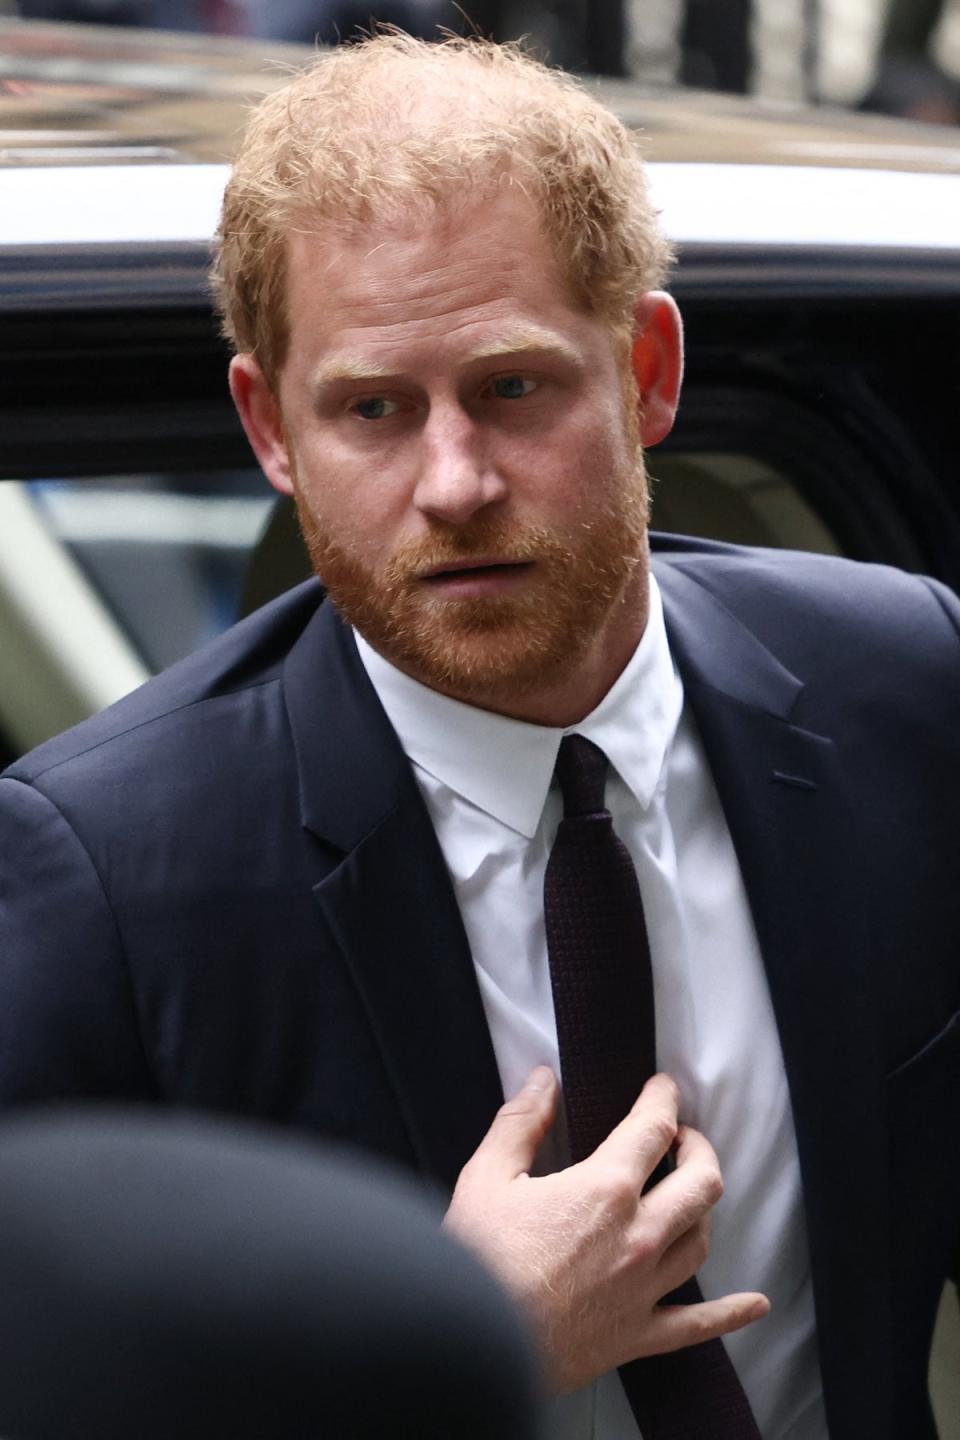 The Duke of Sussex has won damages of £140,600 against Mirror Group Newspapers (MGN) at the High Court on Friday (AFP via Getty Images)